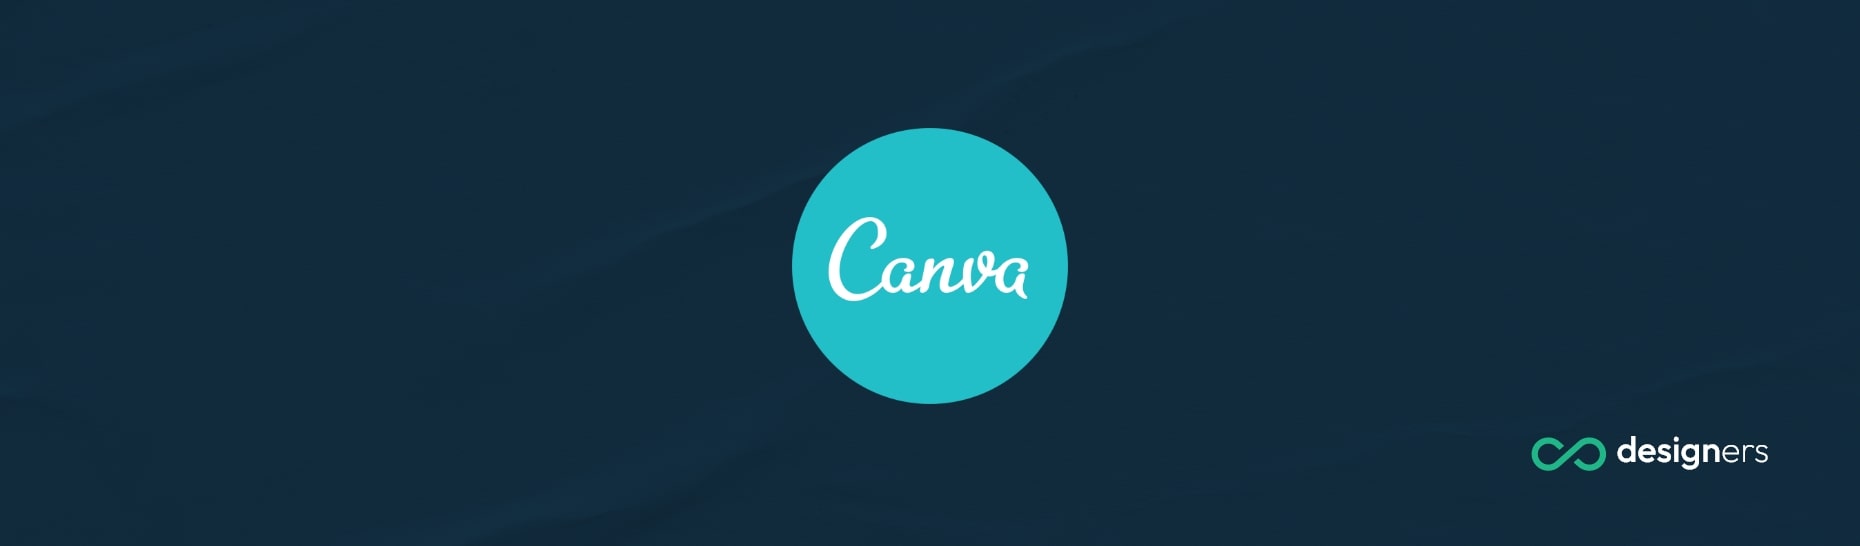 Does Canva Have Email Marketing?